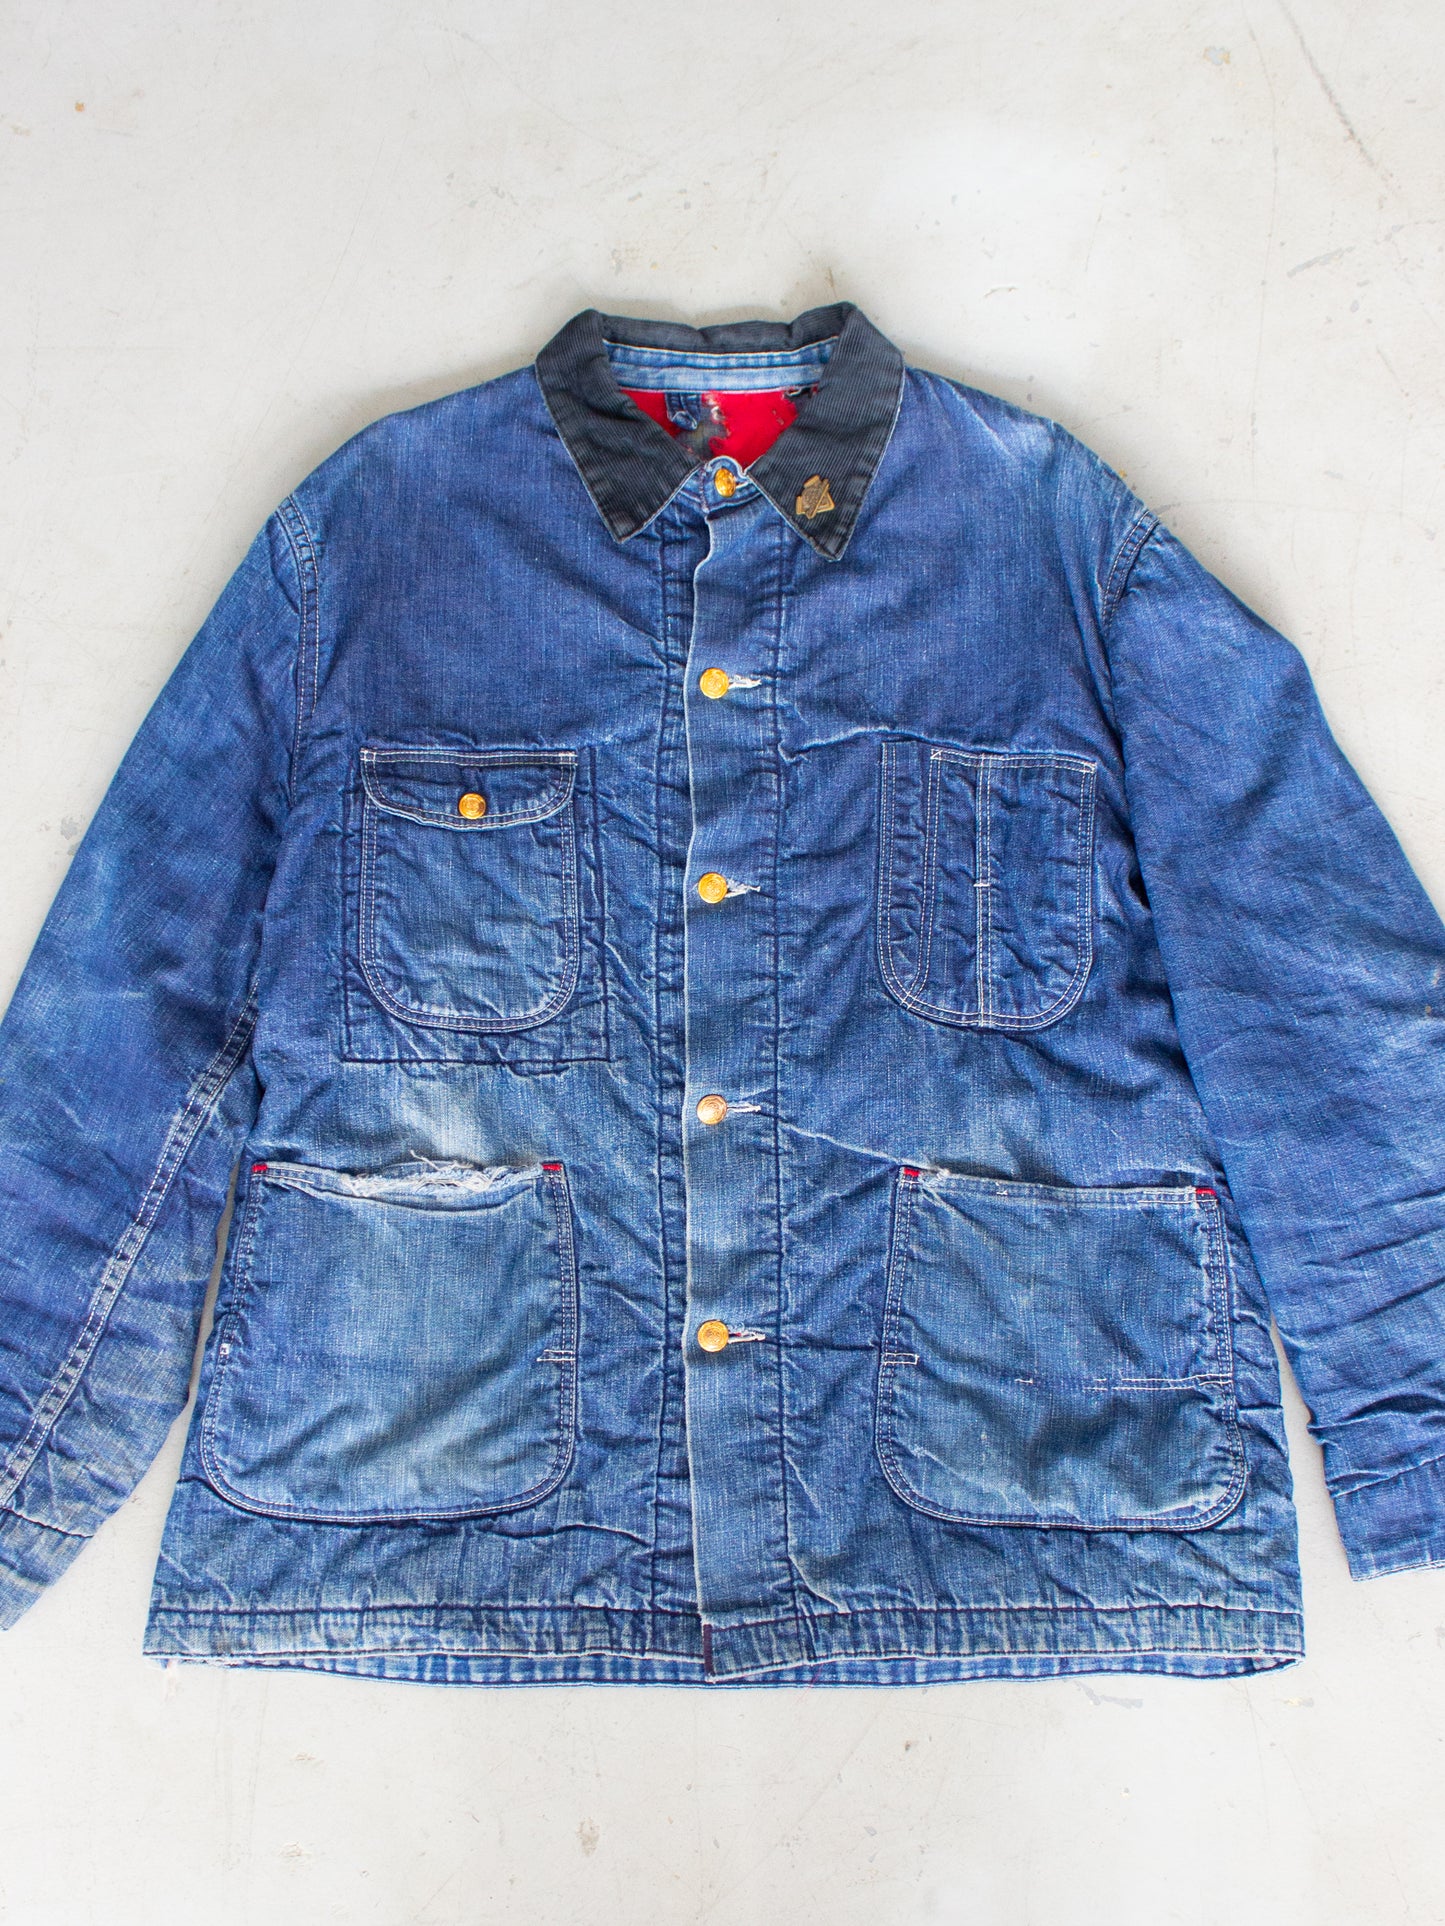 Vintage Quilted Lined Chore Denim Jacket With Harley Davidson Pin Medium